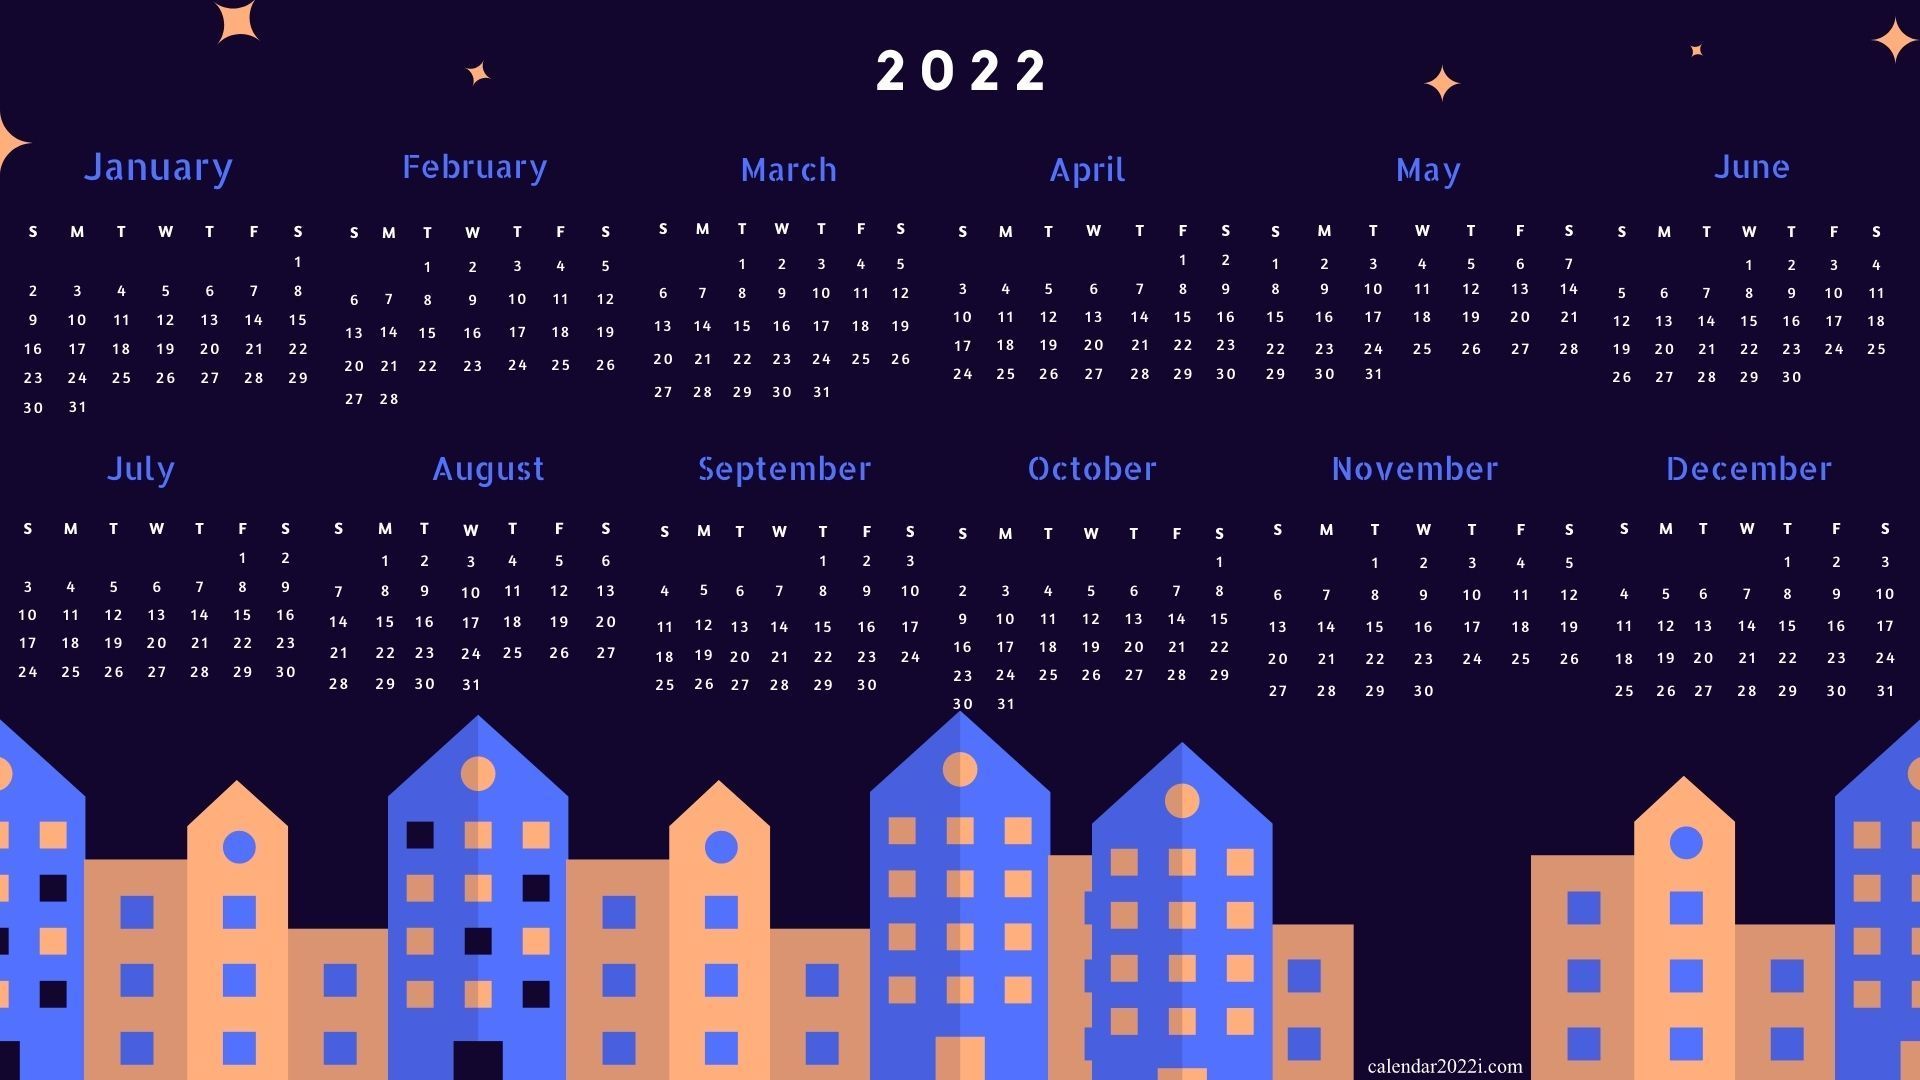 Free Calendar 2022 Yearly Wallpapers with all 12 Months from January to December in 2021